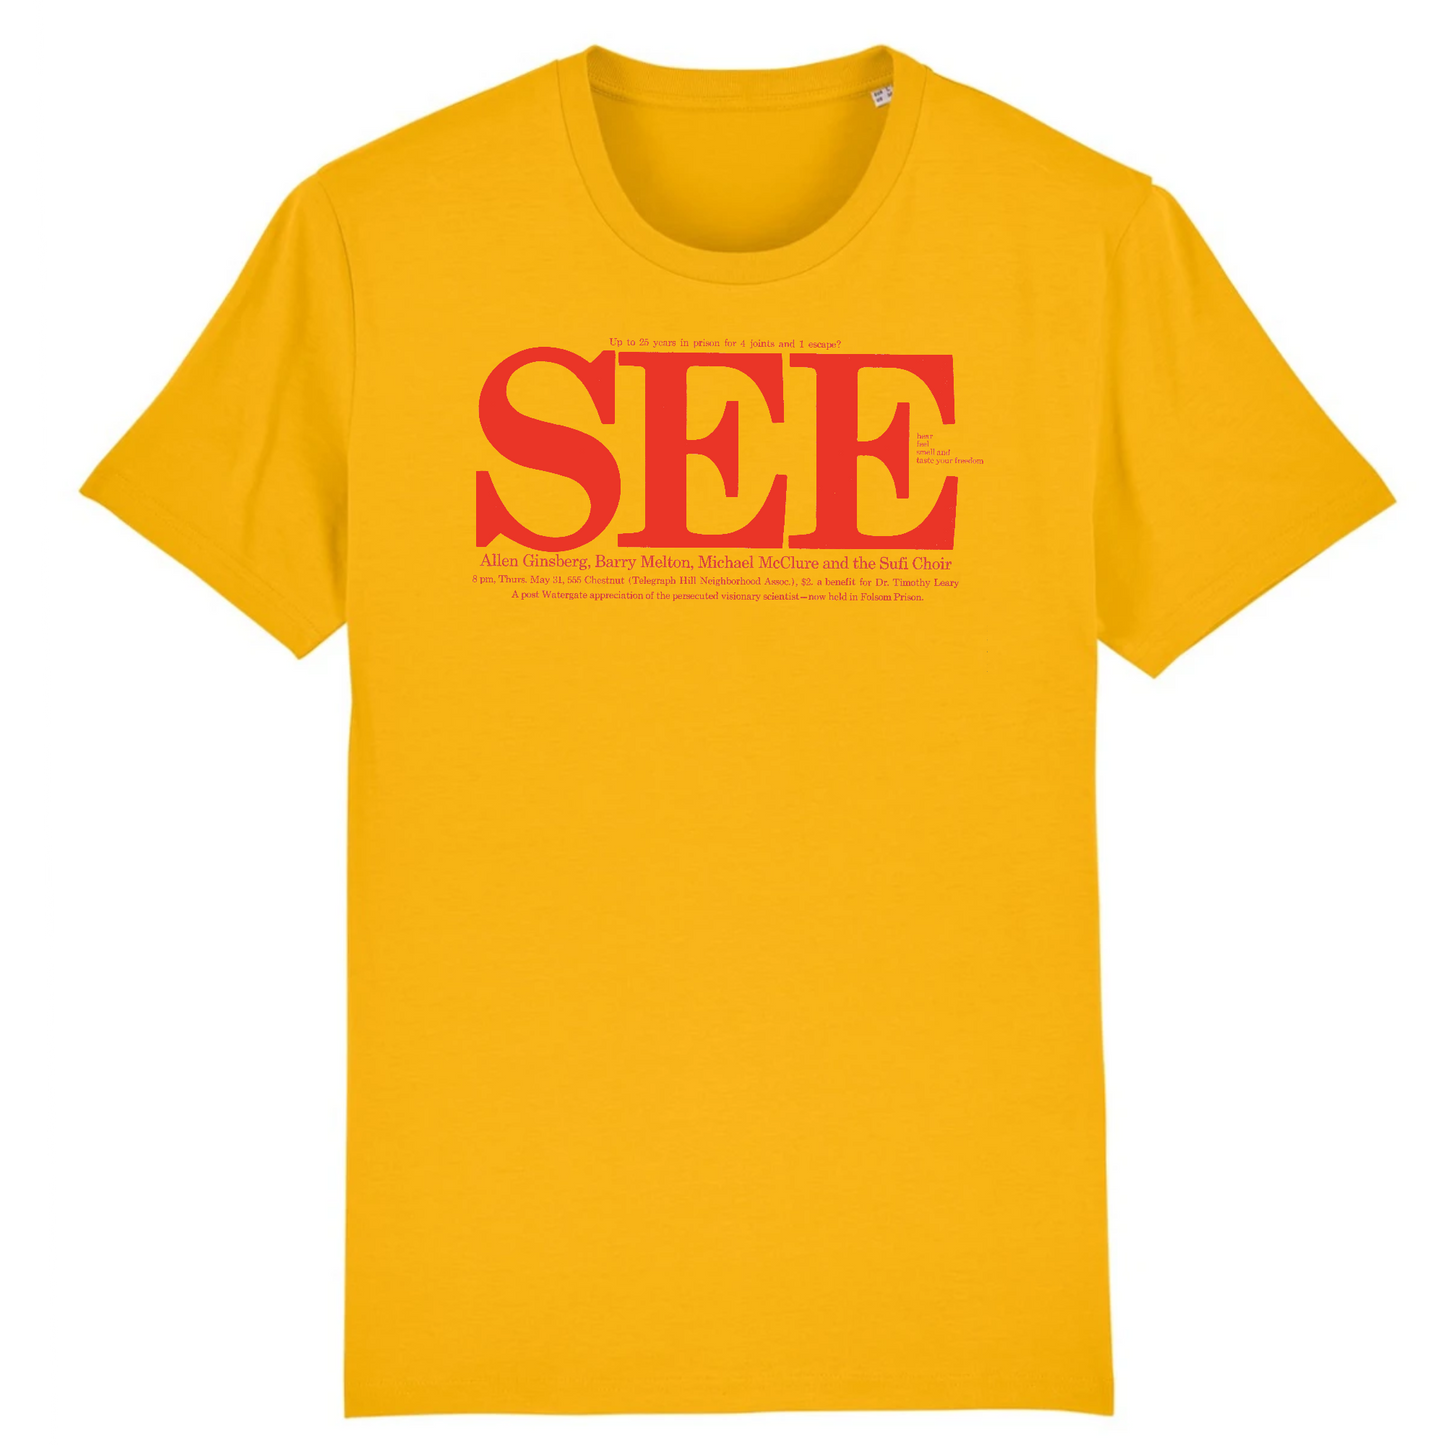 See In, 1973 - Organic Cotton T-shirt